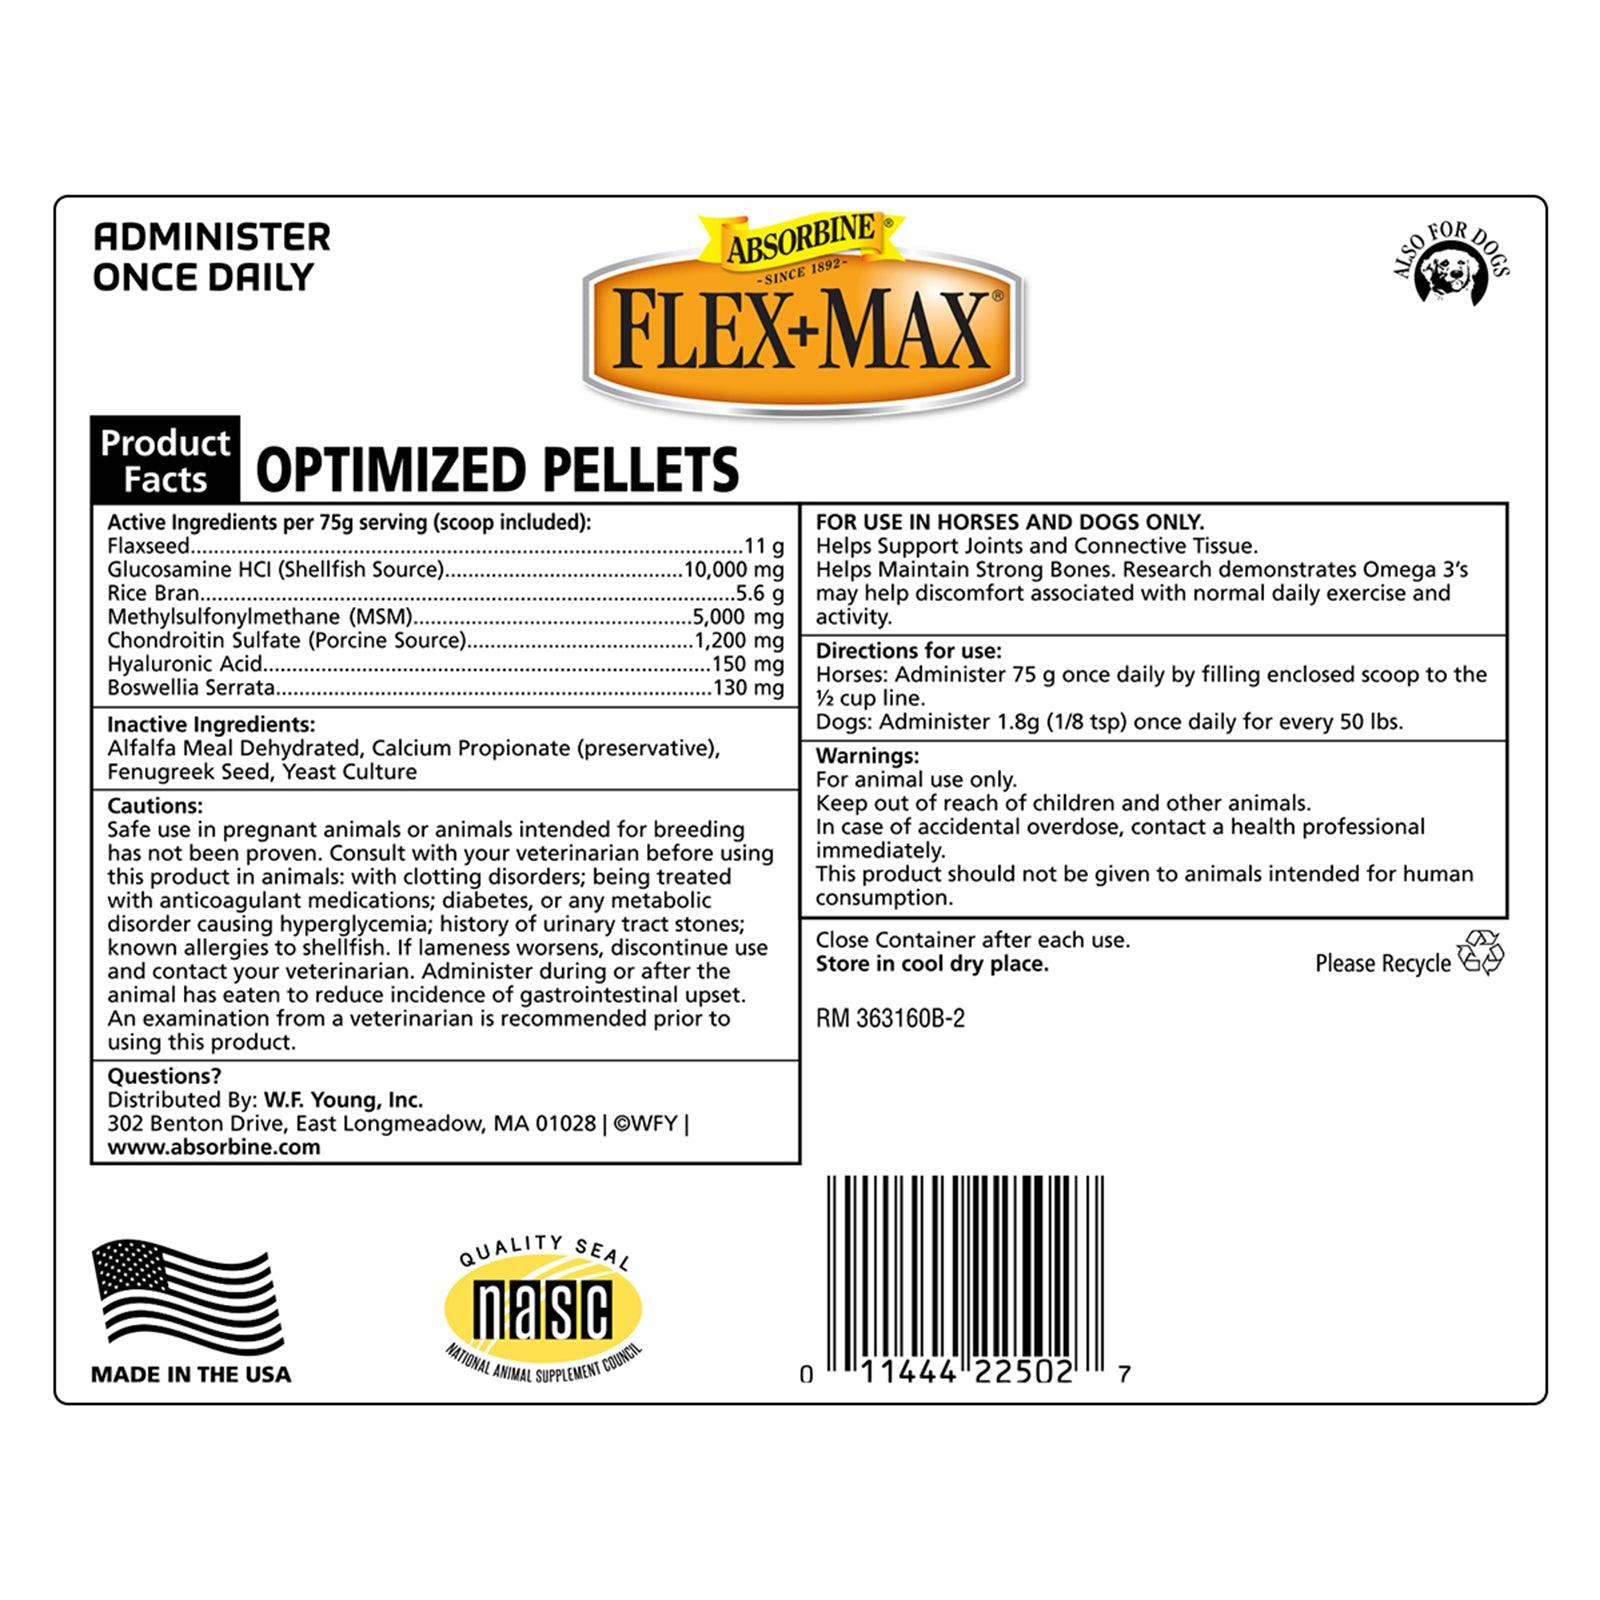 Absorbine Flex + Max administer once daily, optimized pellets product facts back label.